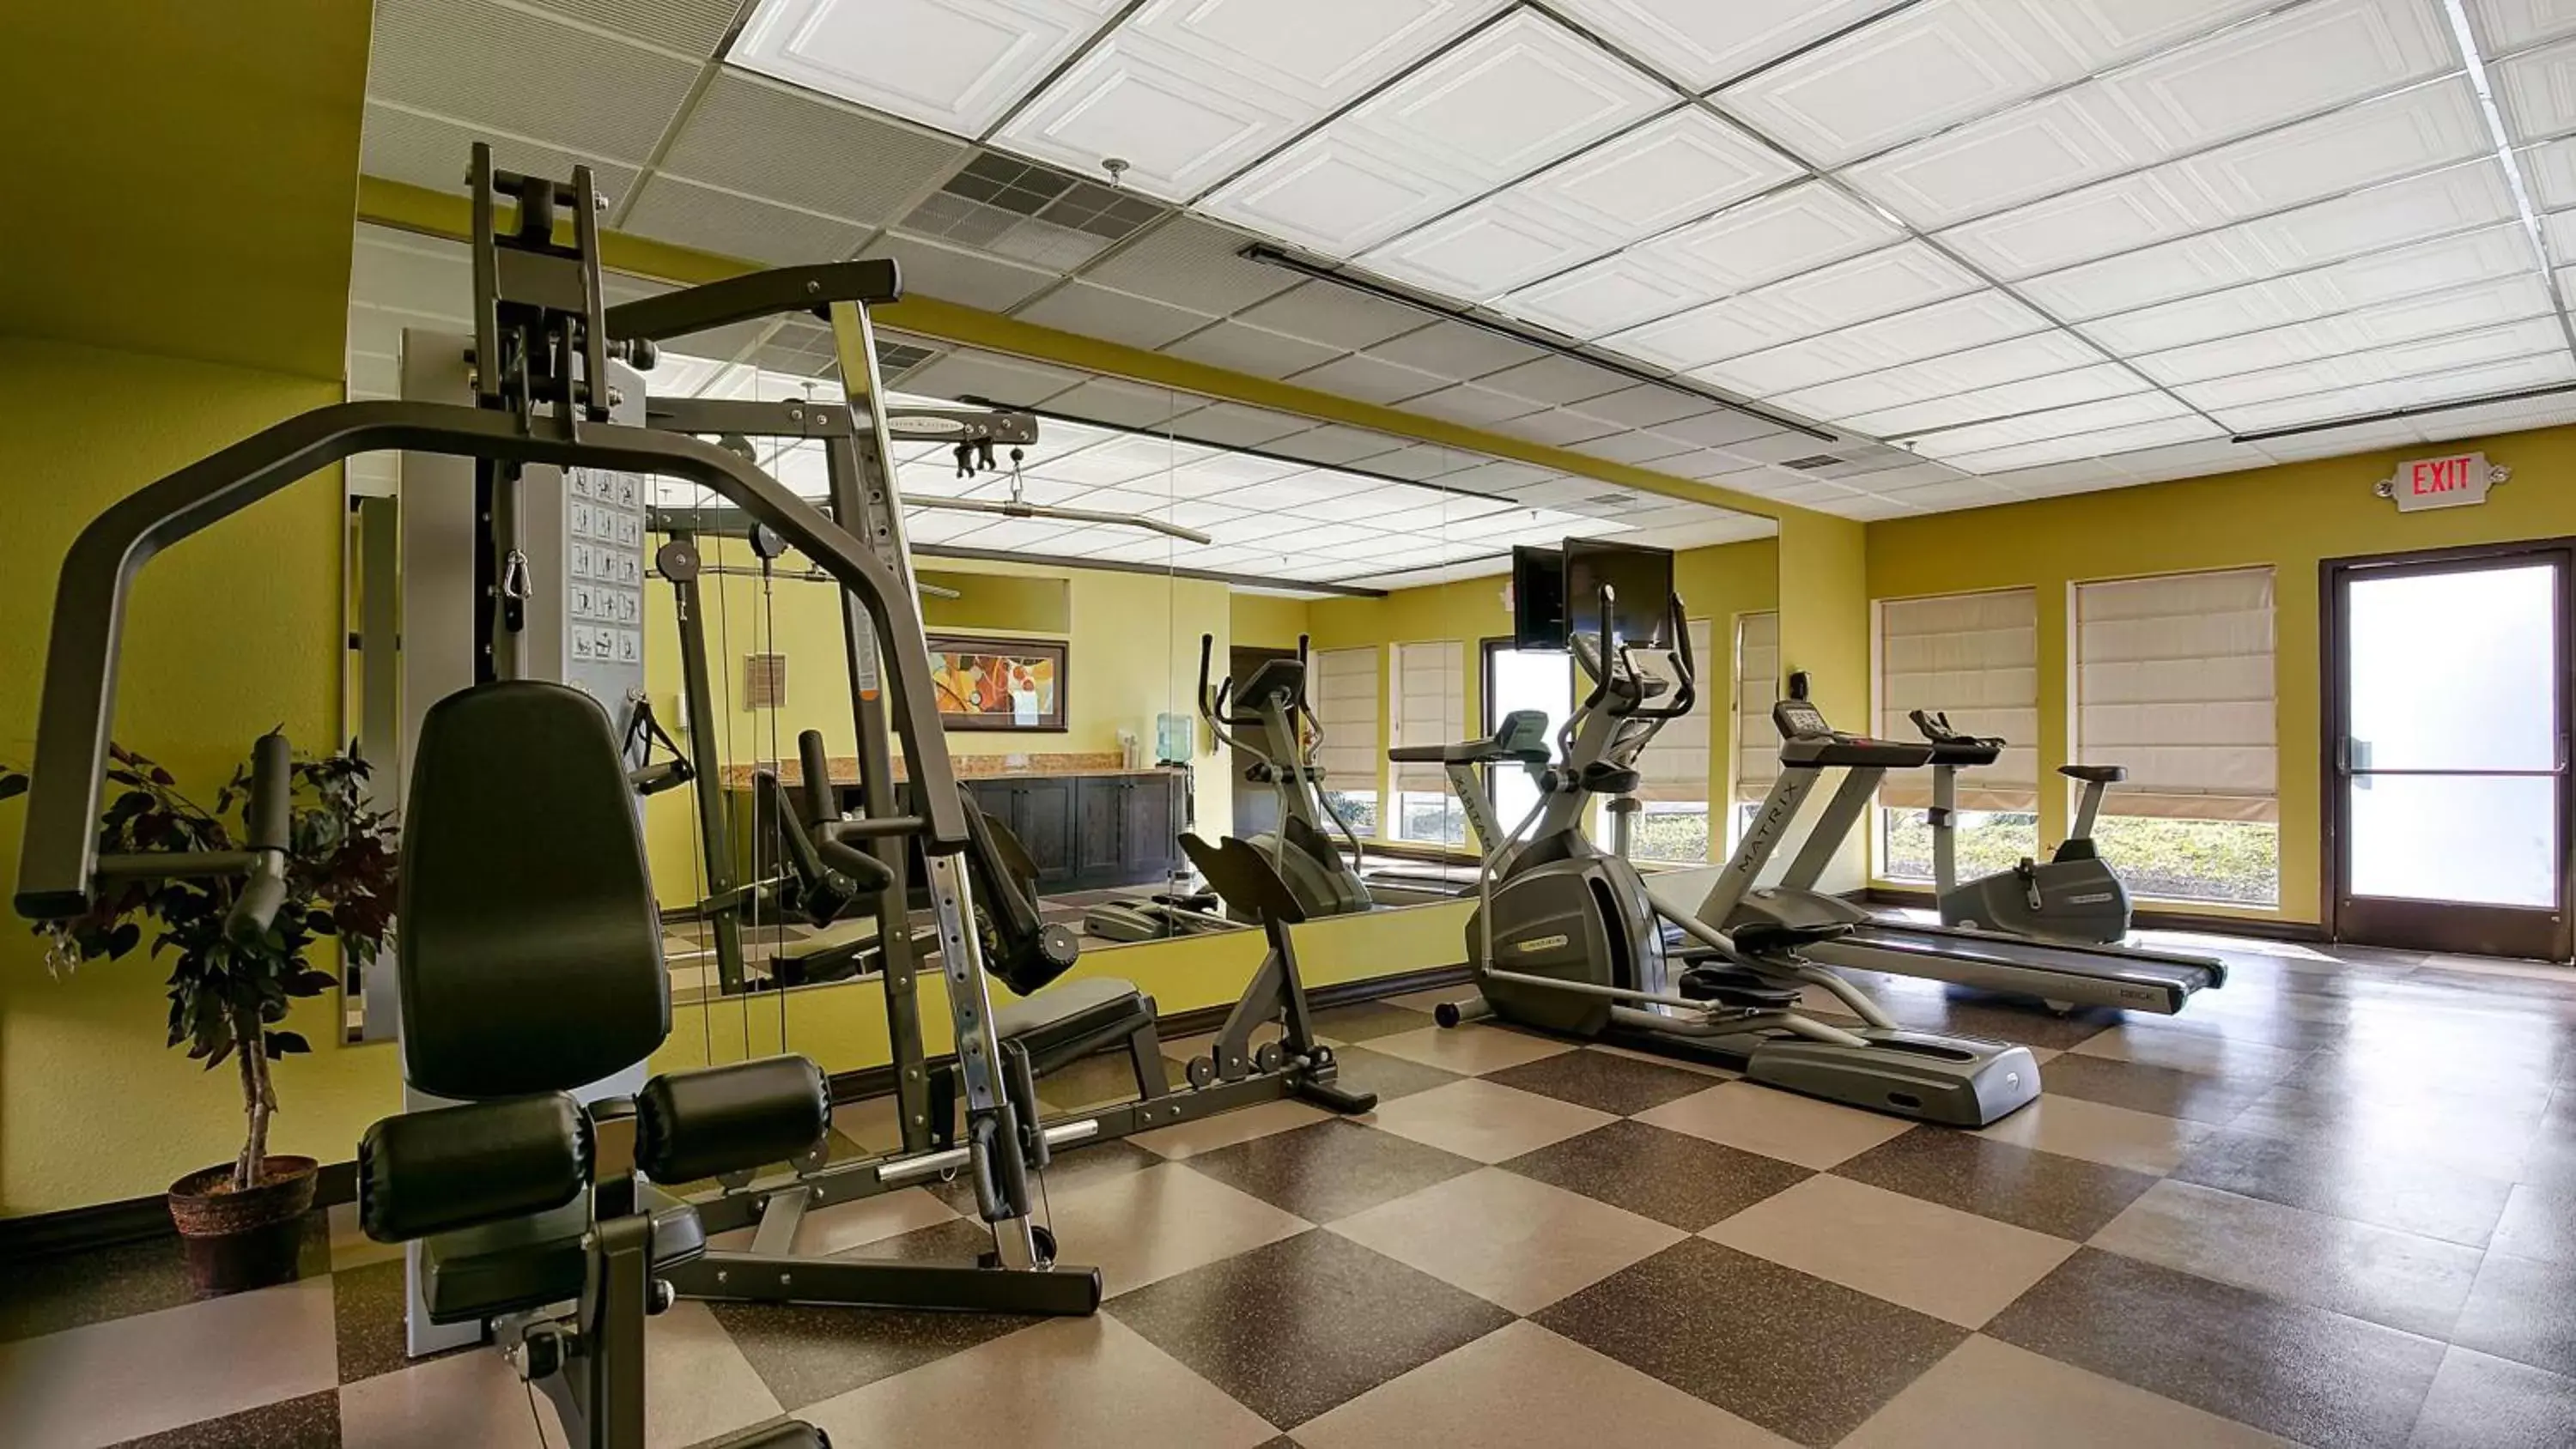 Fitness centre/facilities, Fitness Center/Facilities in Best Western Plus Inn at the Vines